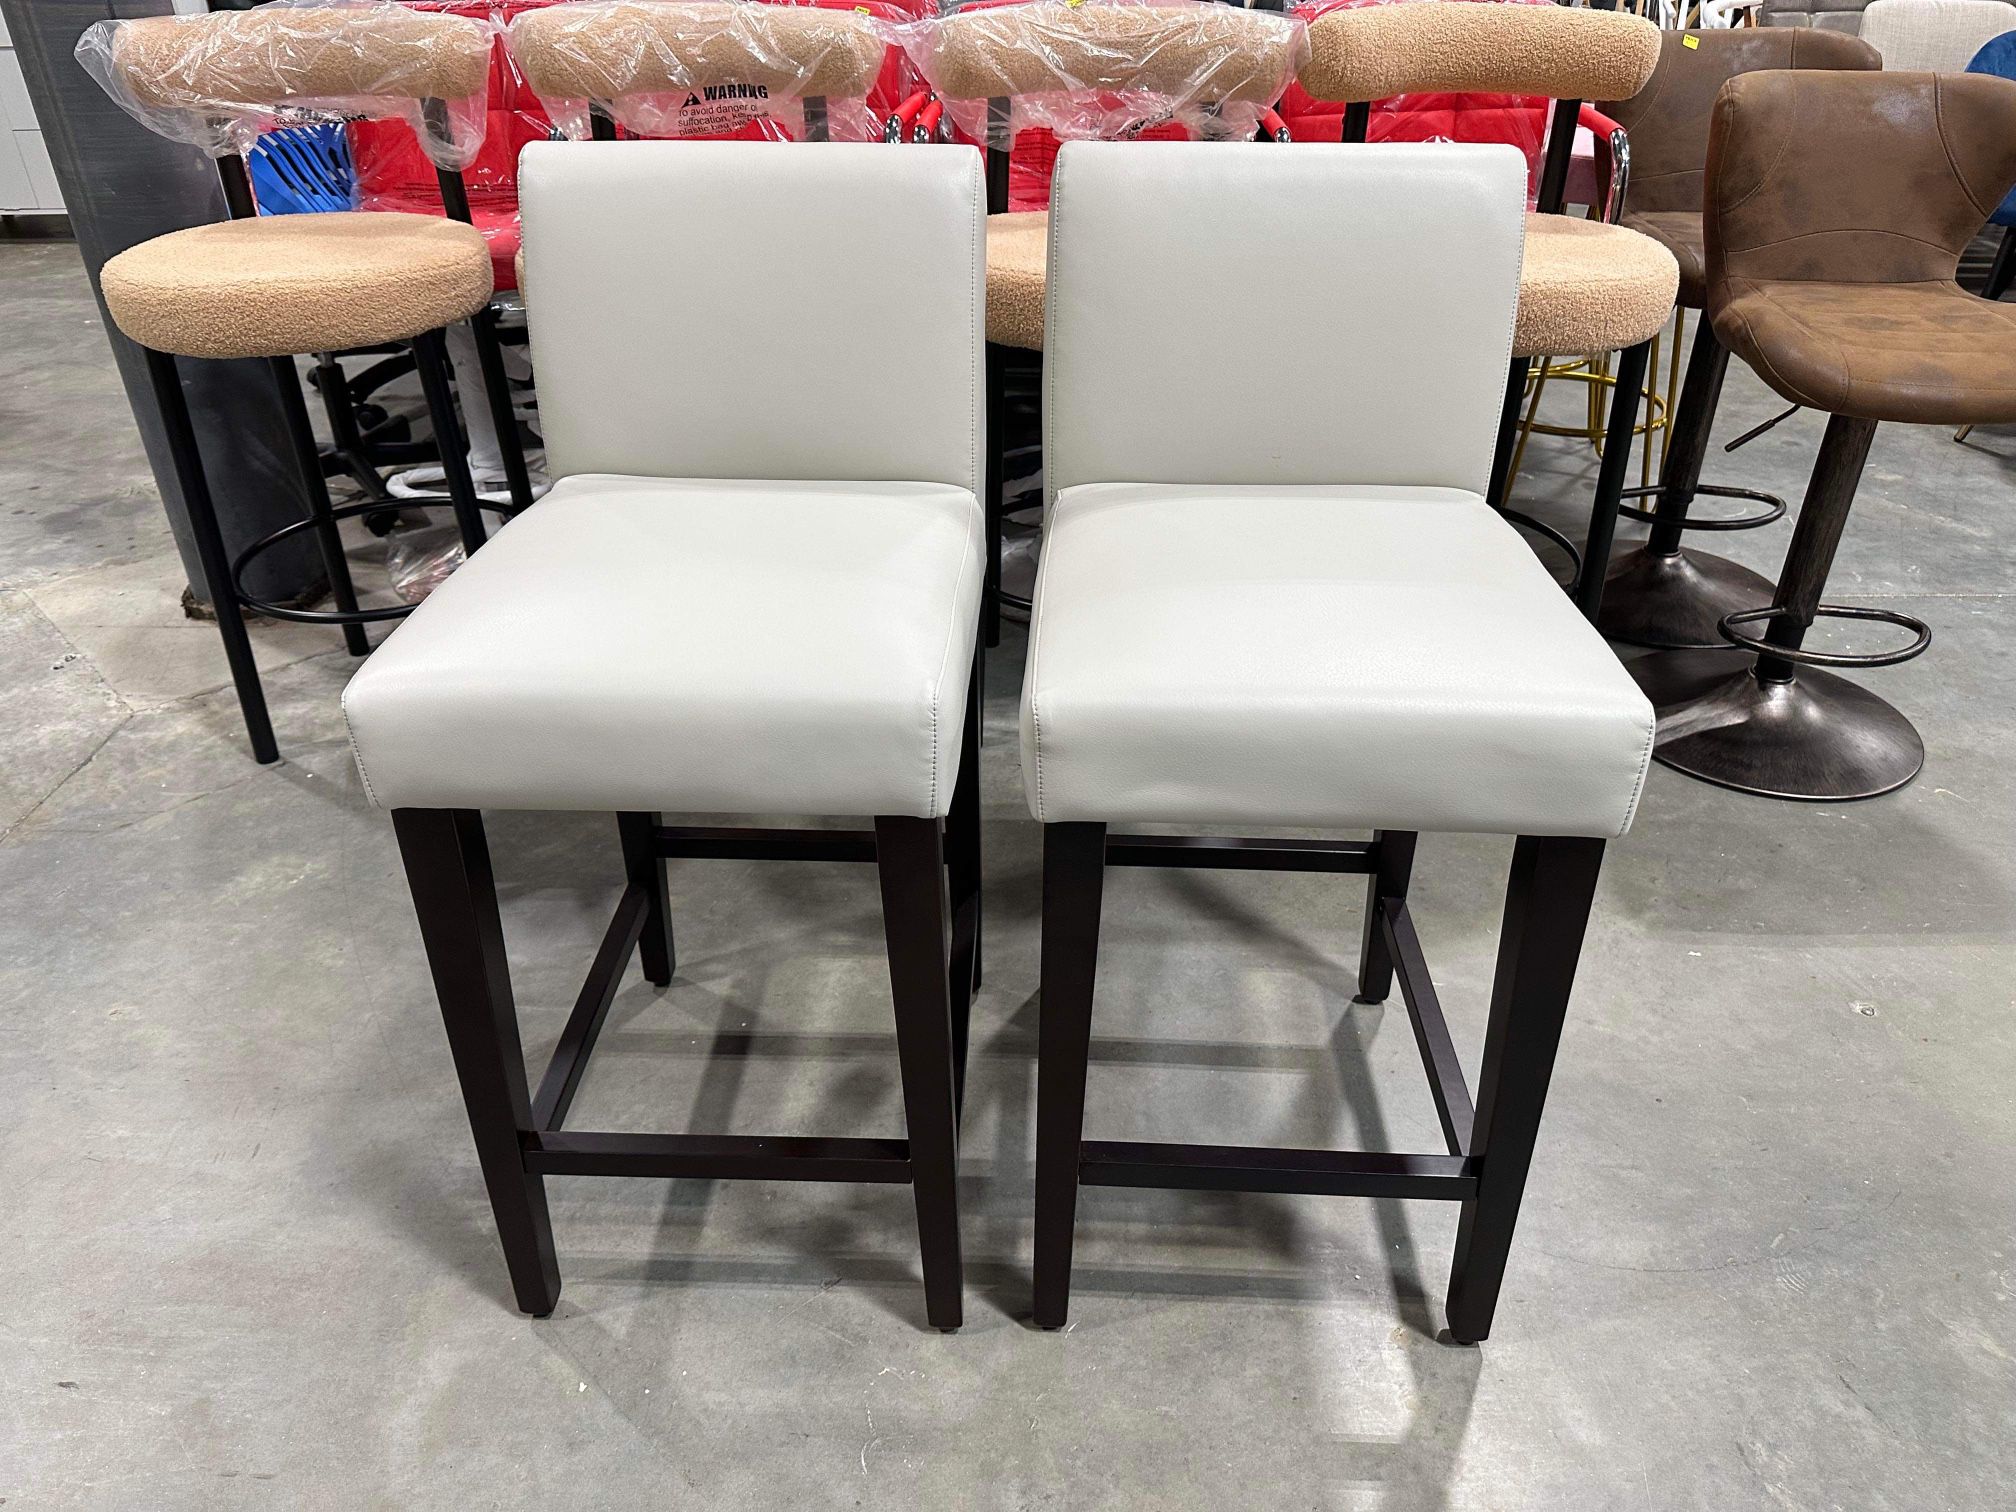 CHITA Counter Height Bar Stools Set of 2, 25" H Seat Height Upholstered Barstools, PU Leather(some stain on one)